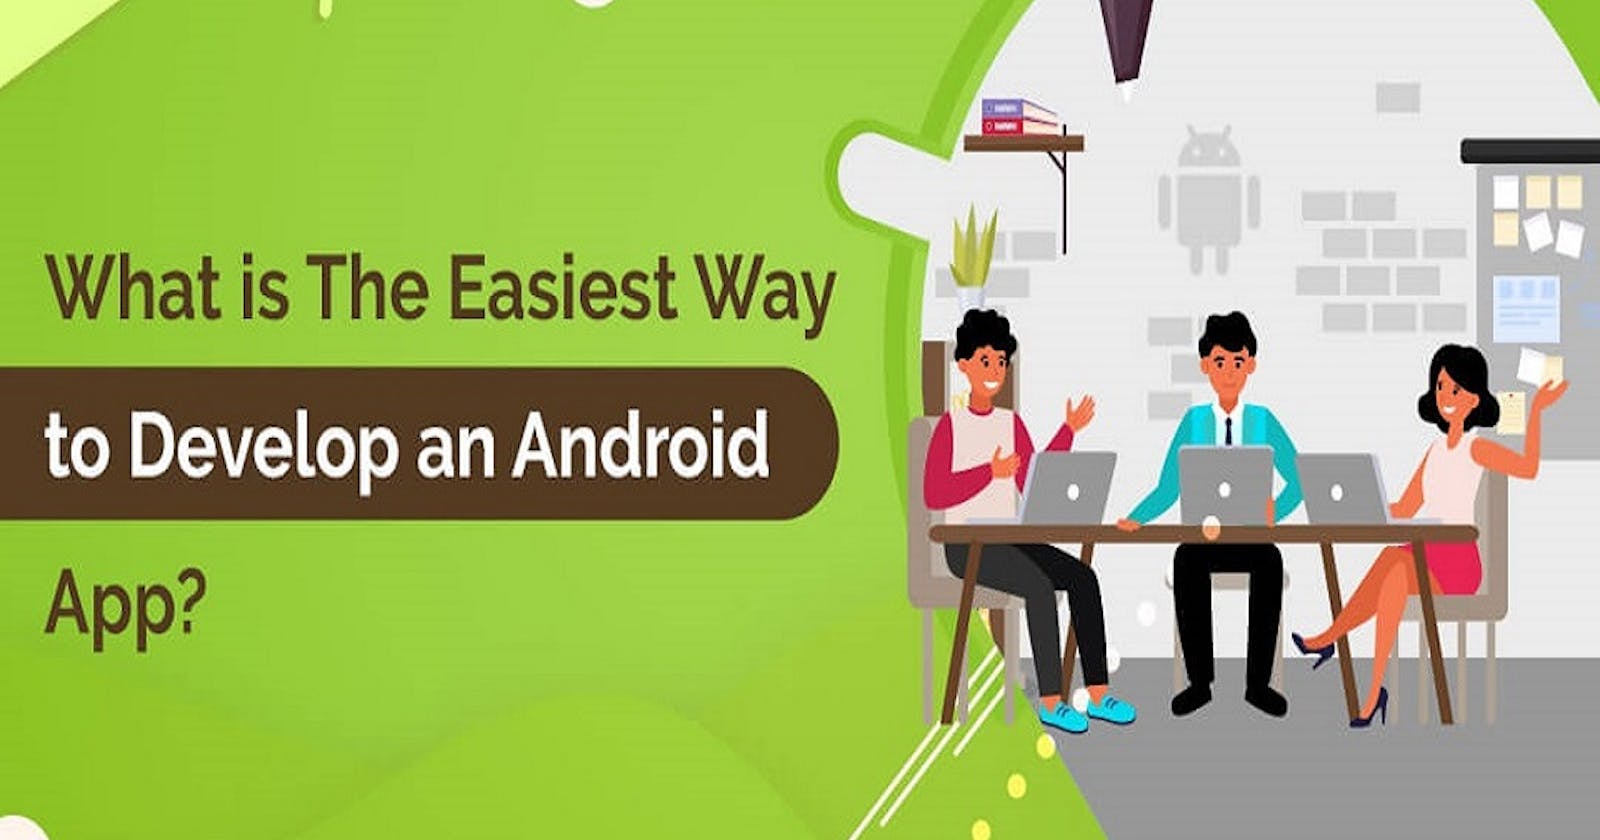 How to Develop an Android App Easiest Way?